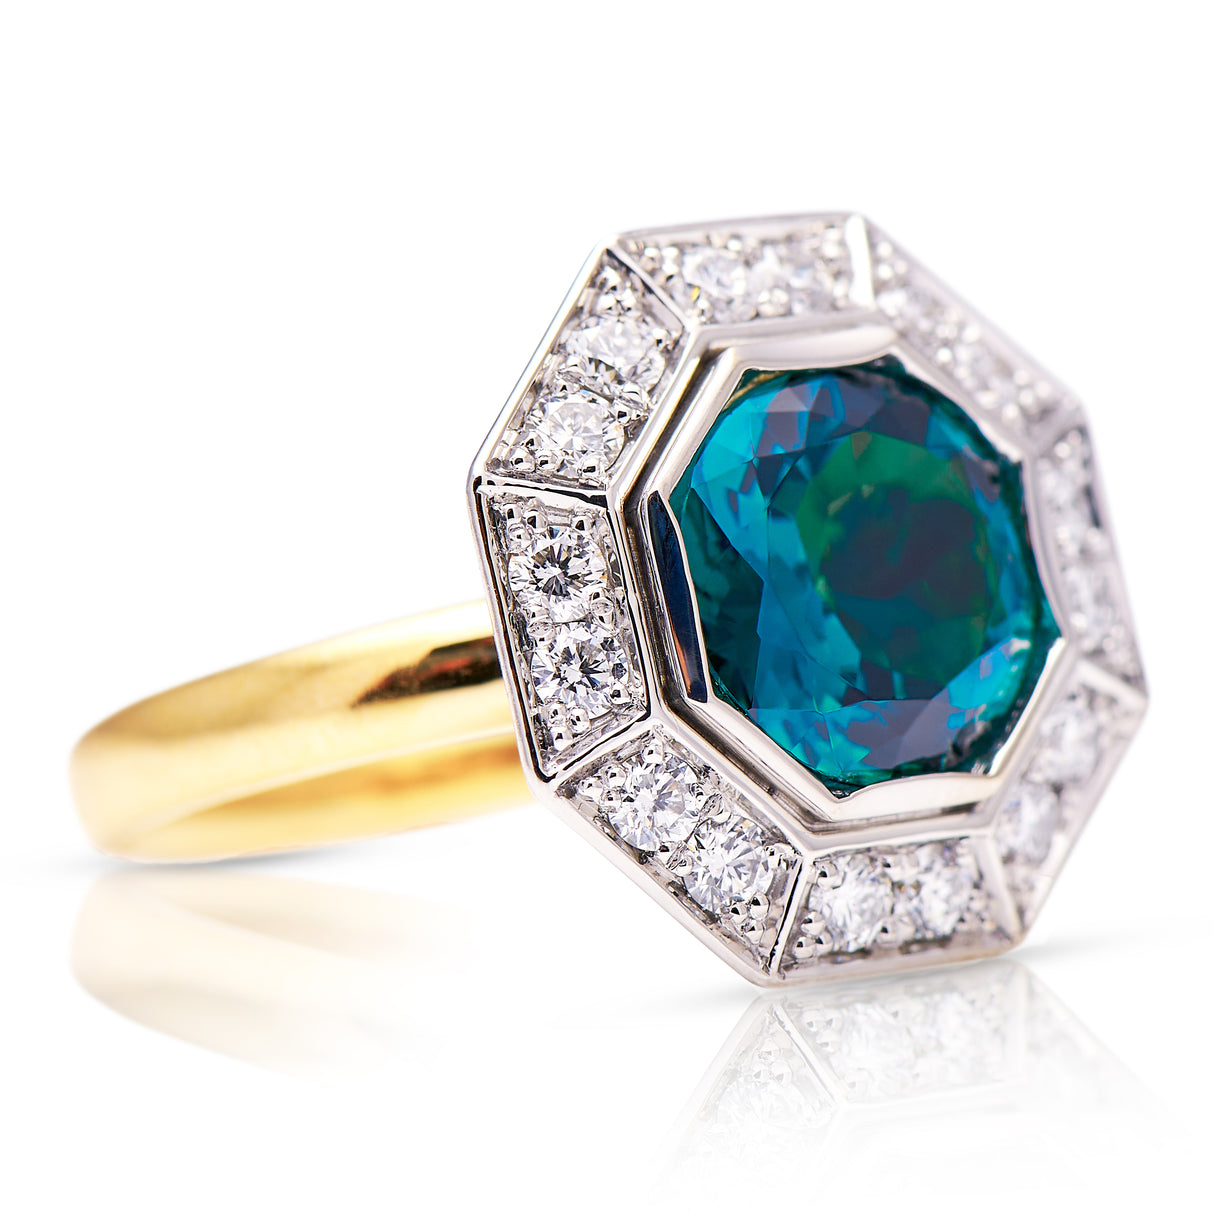 Contemporary, Tourmaline and Diamond Hexagonal Cluster Ring, 18ct Yellow Gold and Platinum